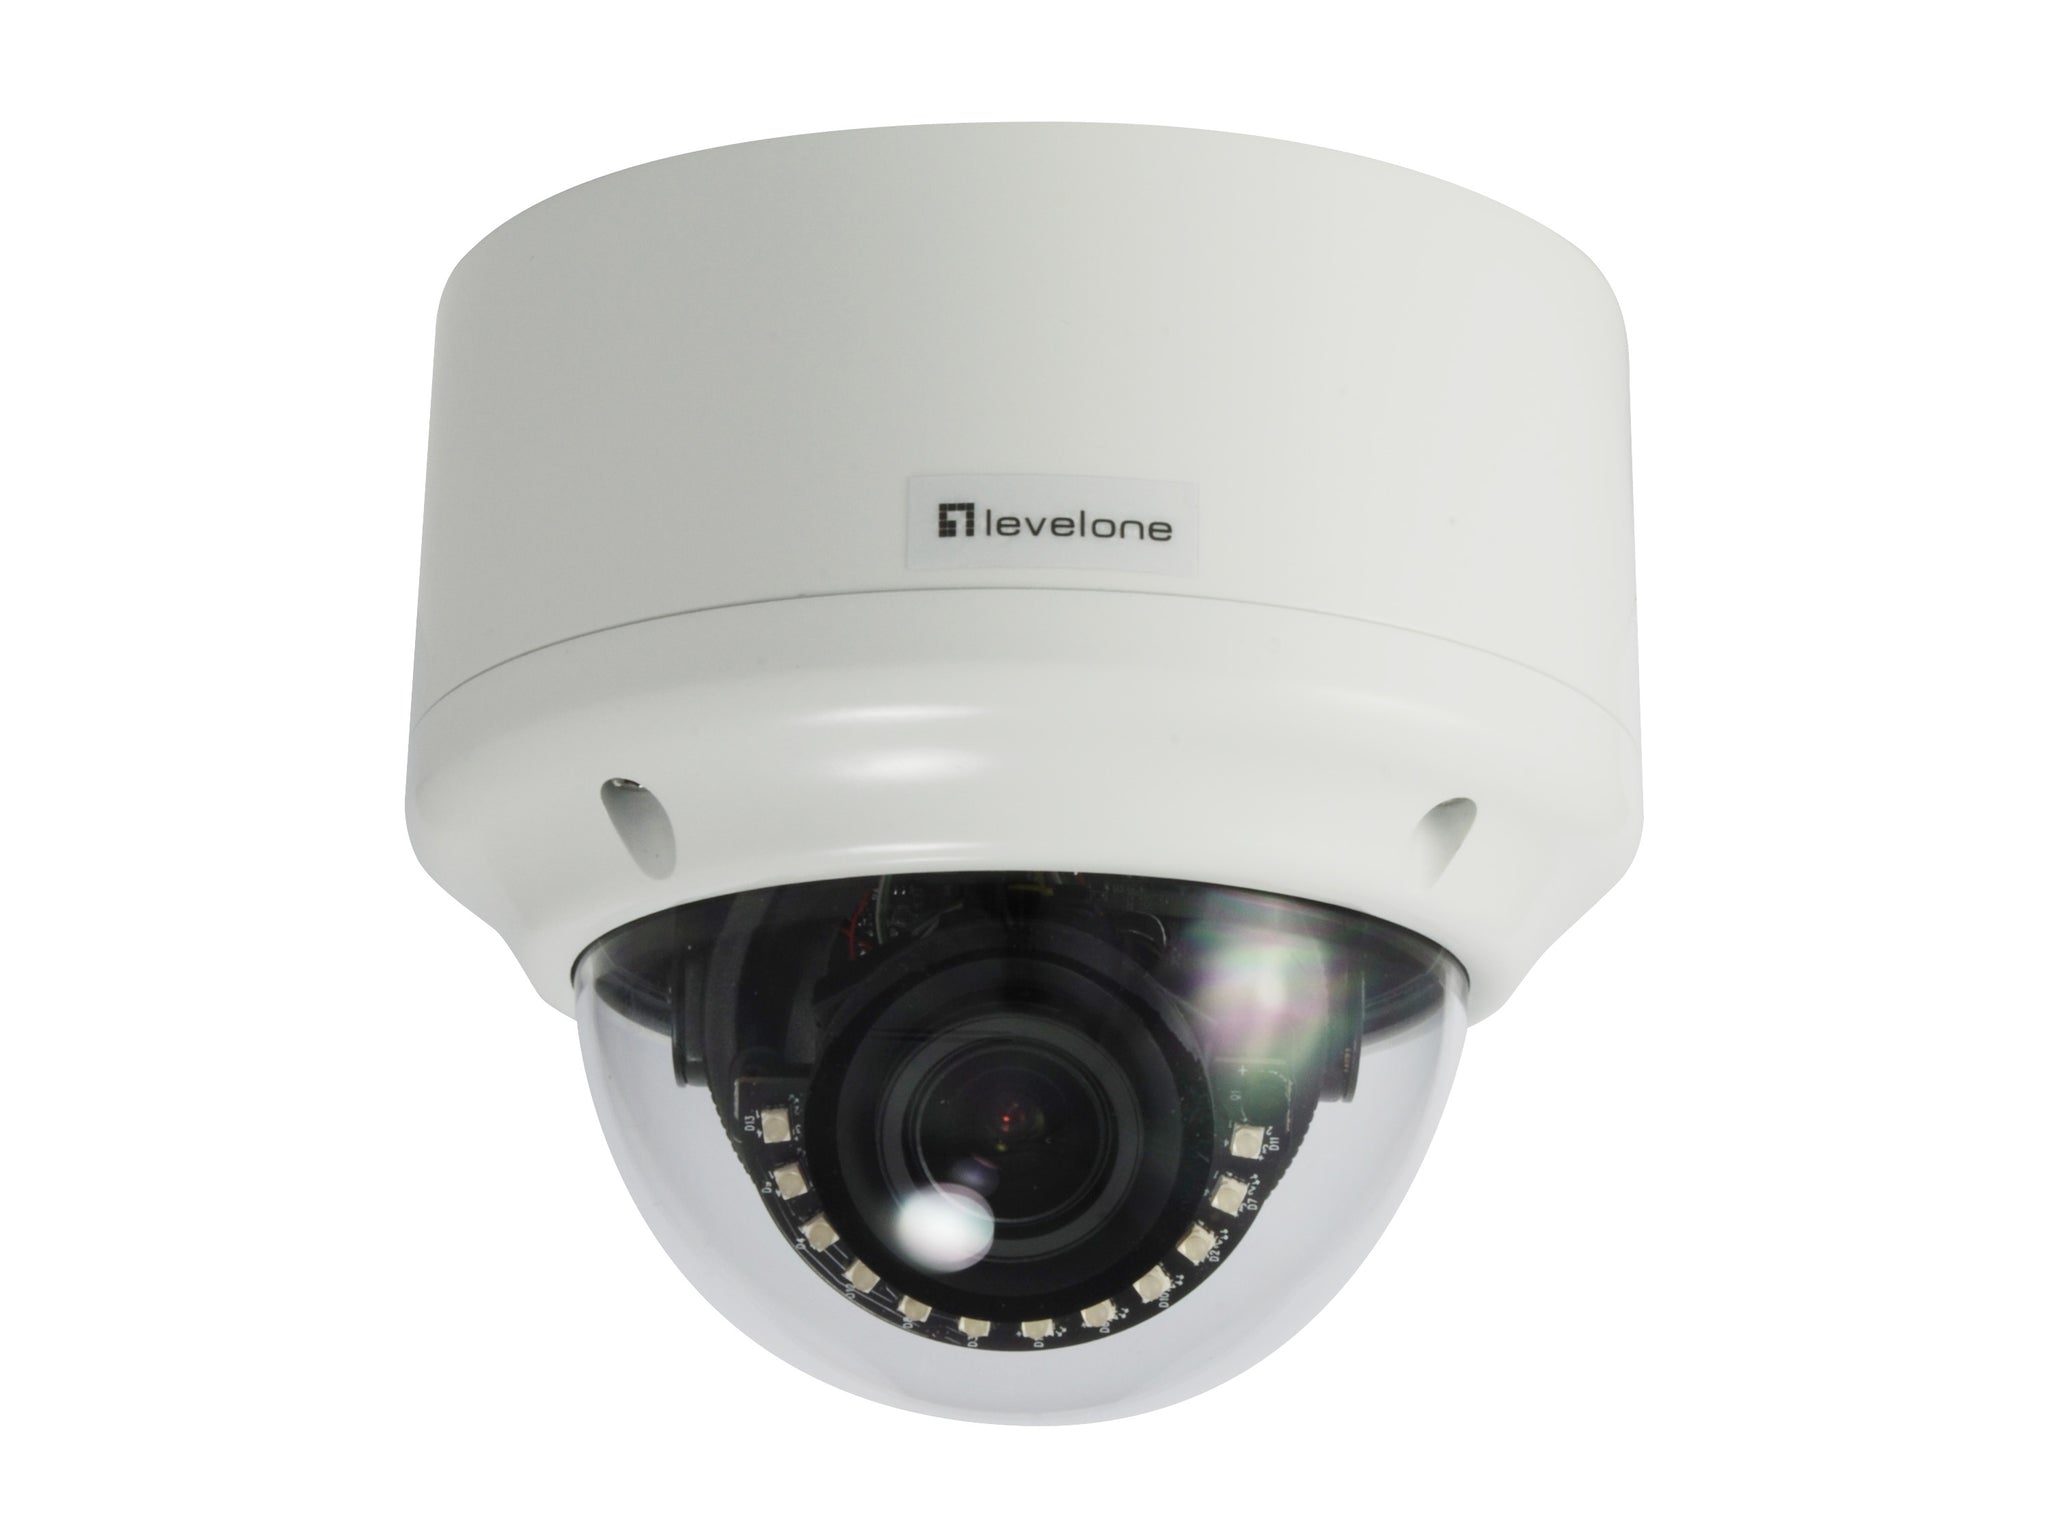 FCS-3304 Fixed Dome , H.265/264, 3MP, 802.3af PoE, 4.3X Optical Zoom, Indoor/Outdoor